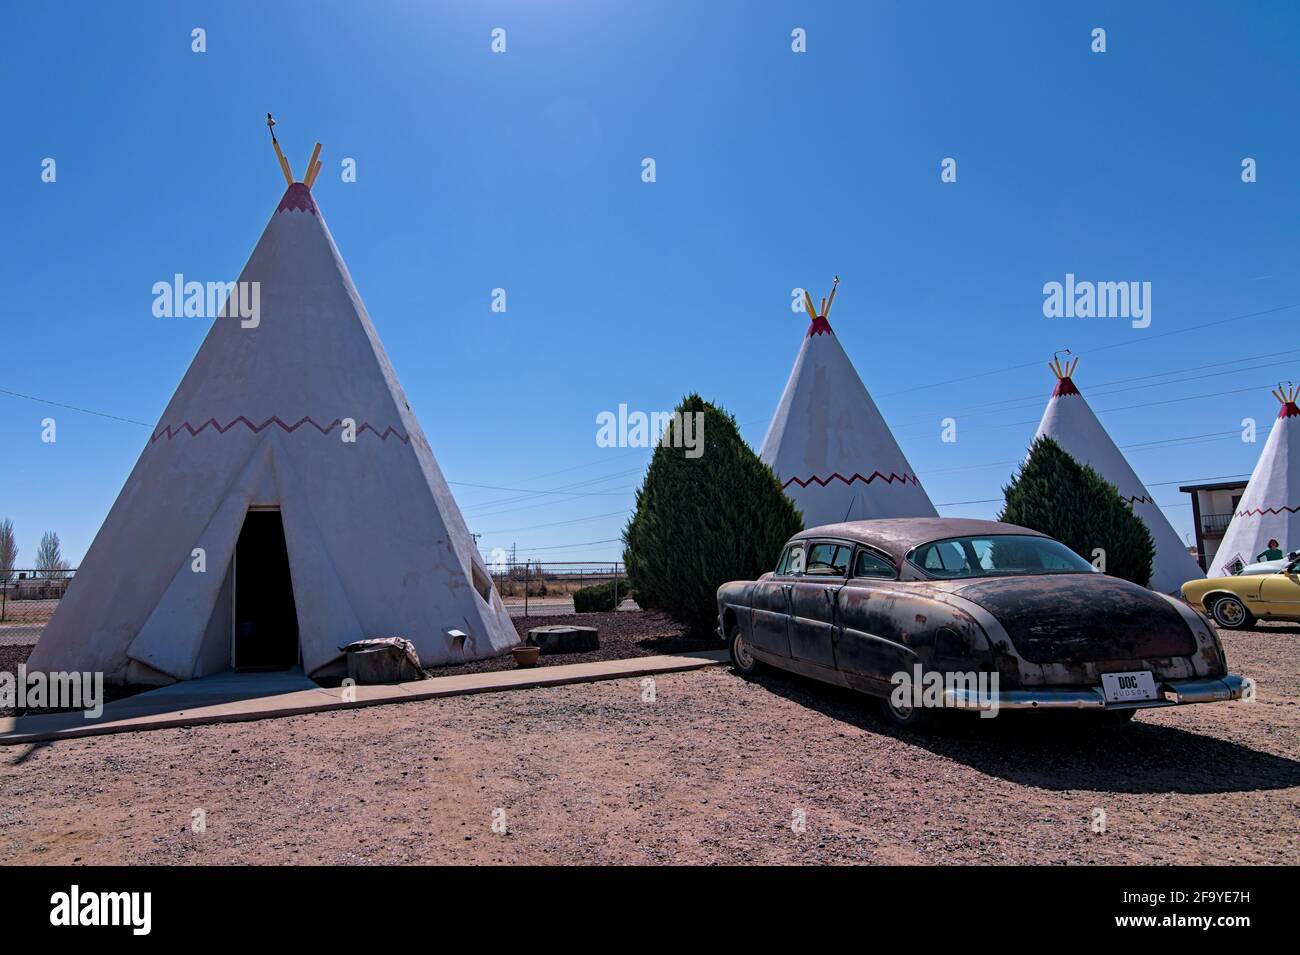 HOLBROOK, Arizona USA - April 4, 2021: Wigwam hotel on Route 66 where guests can sleep in teepee wigwam among parked classic cars. Stock Photo